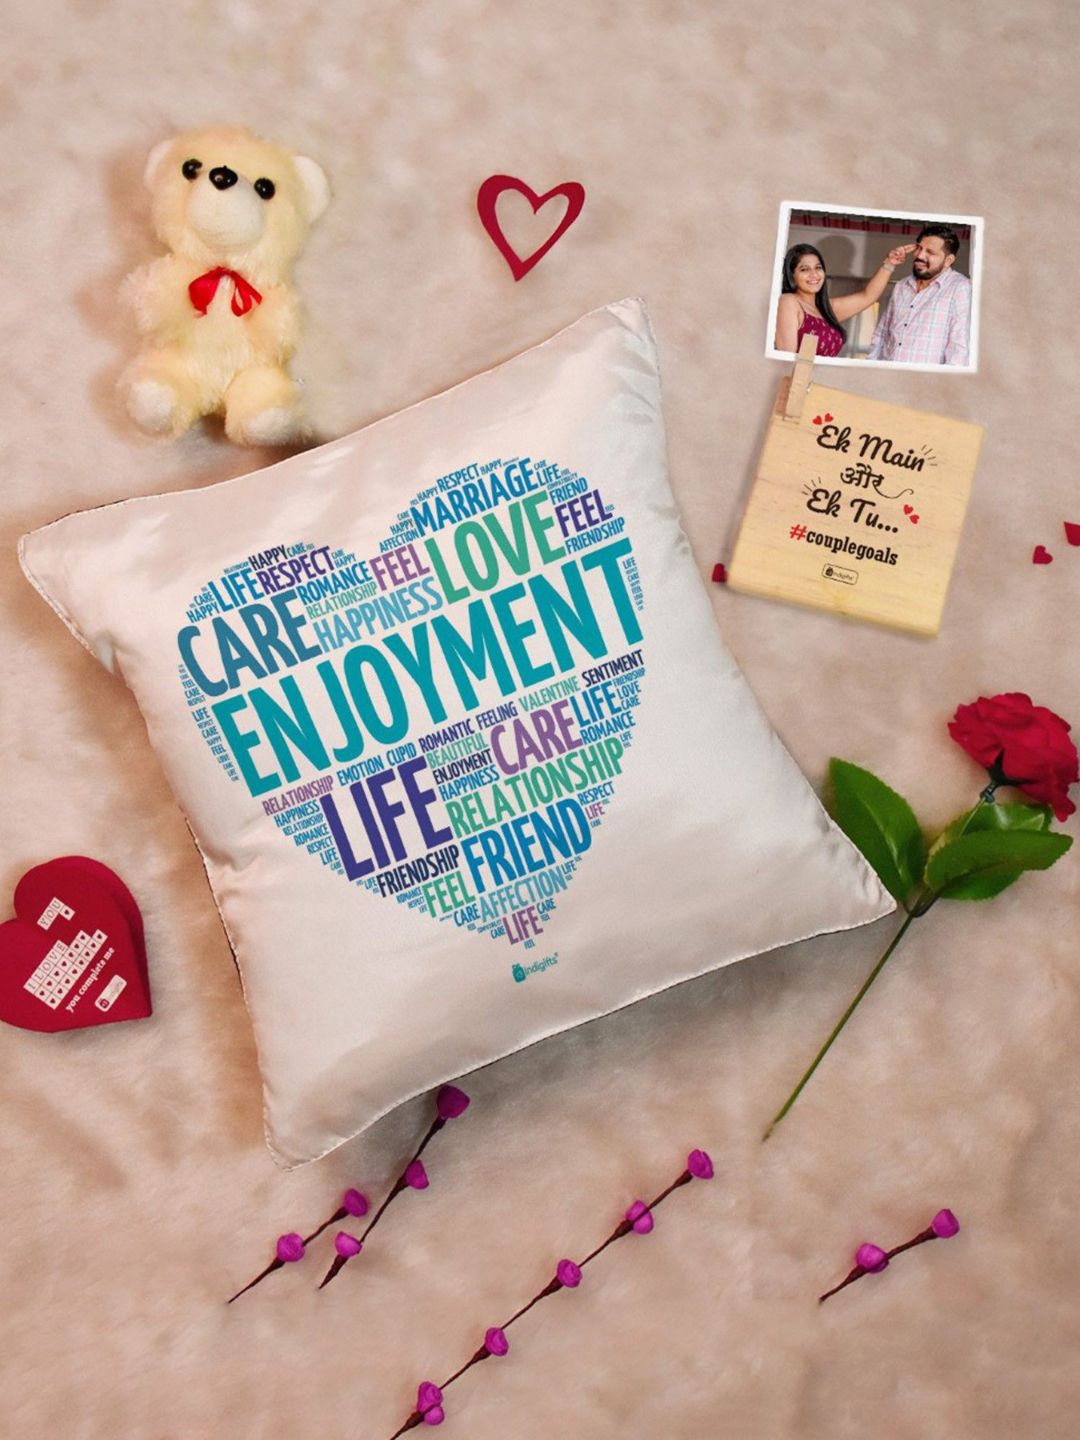 Indigifts Valentine Special Gifts Satin Valentine Love Gifts for Girlfriend Cushion Cover with Filler, Wooden Photo Stand, Teddy, Artificial Rose, Card-for Husband, Wife, Boyfriend, Birthday (12)